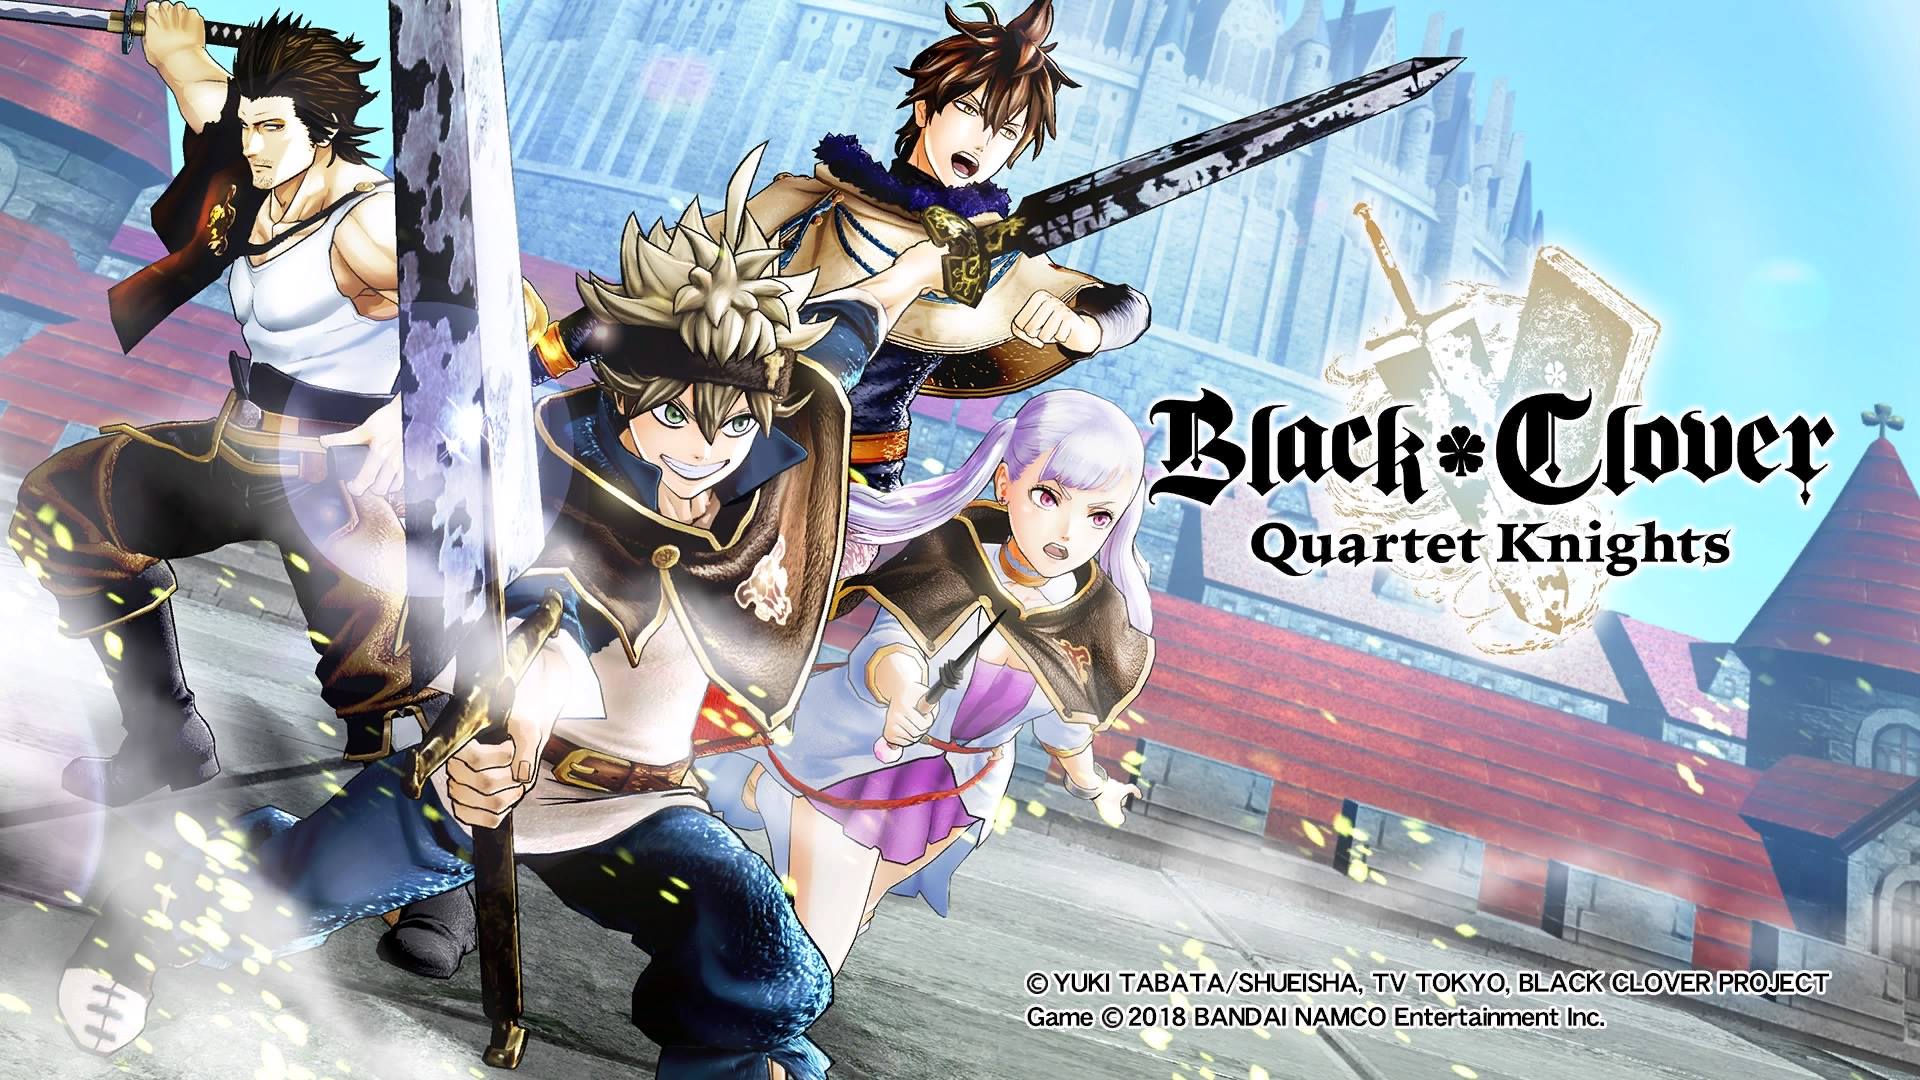 Black Clover Quartet Knights Review. Invision Game Community